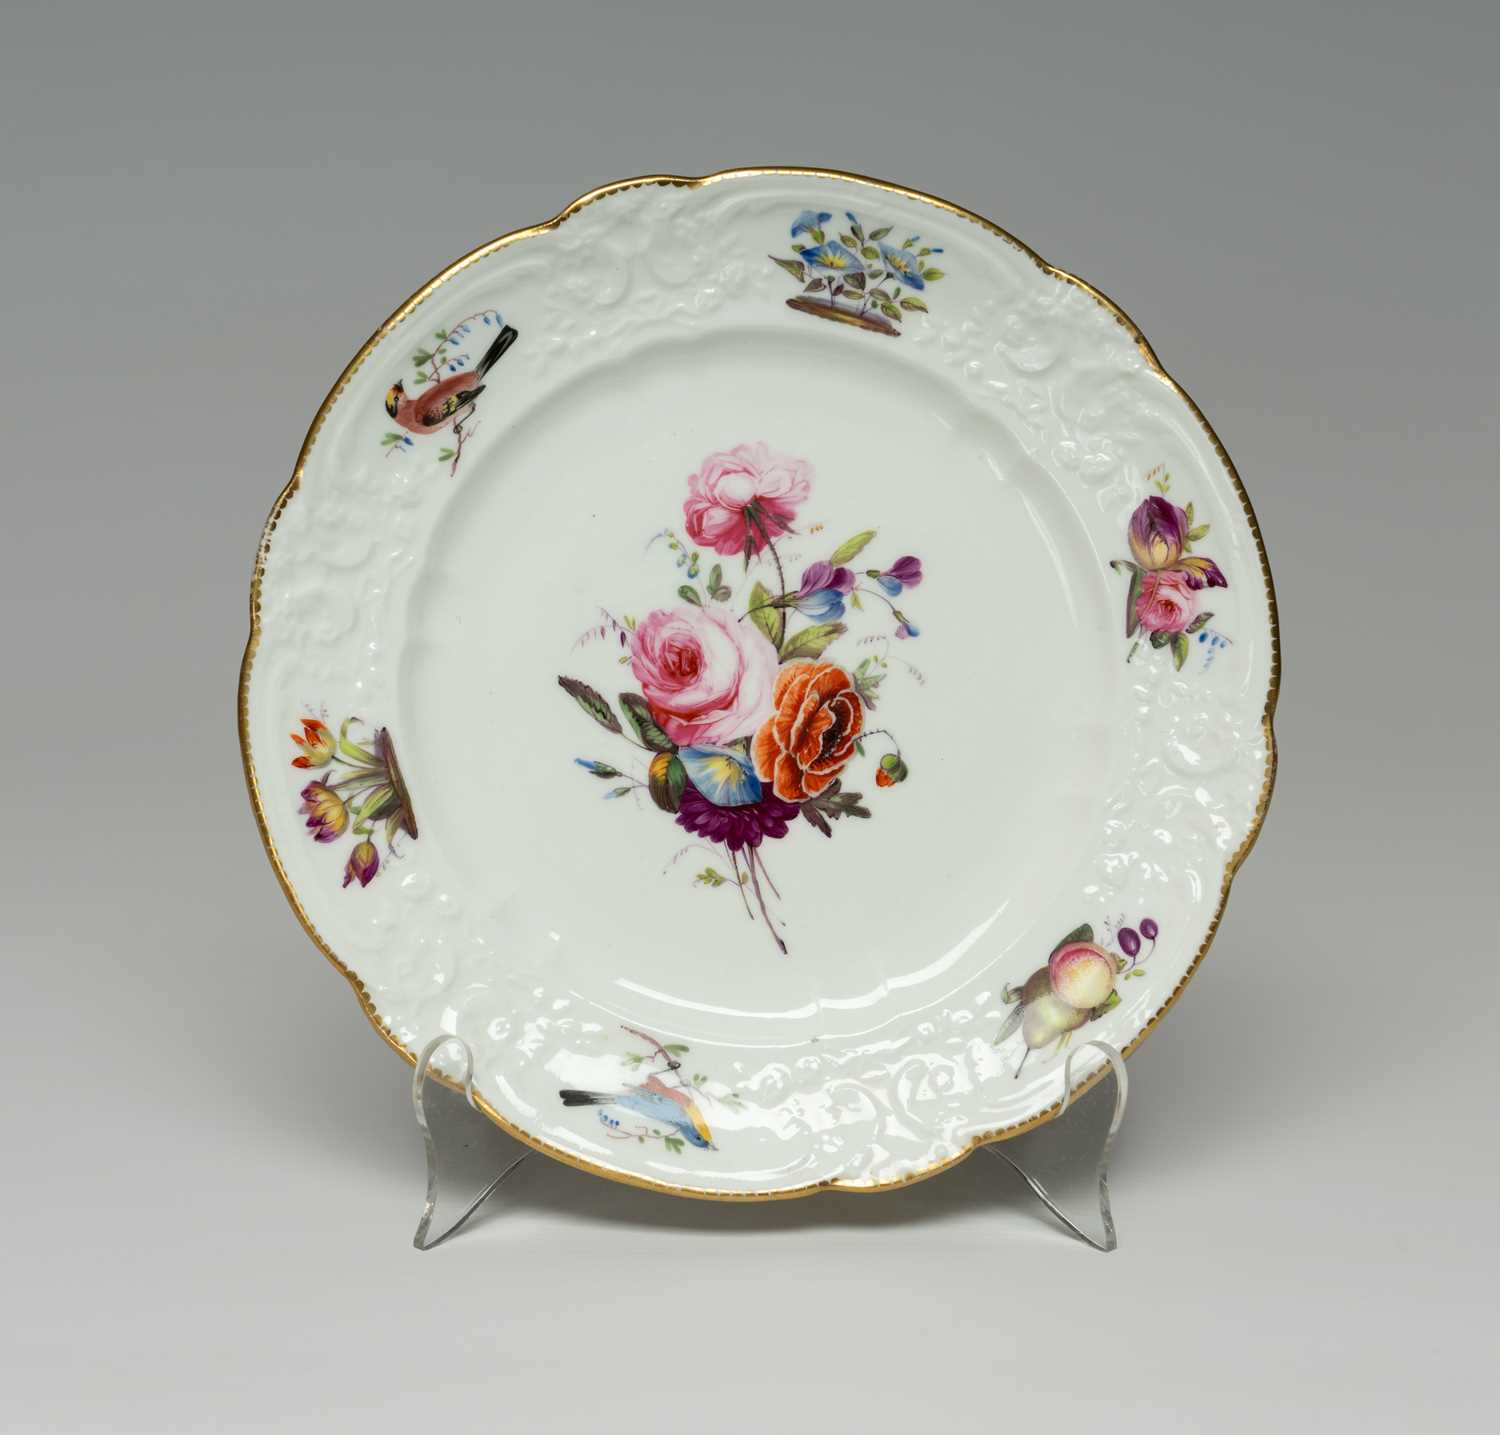 NANTGARW PORCELAIN PLATE FROM THE BRACE SERVICE circa 1818-1820, having C-scroll moulded border,